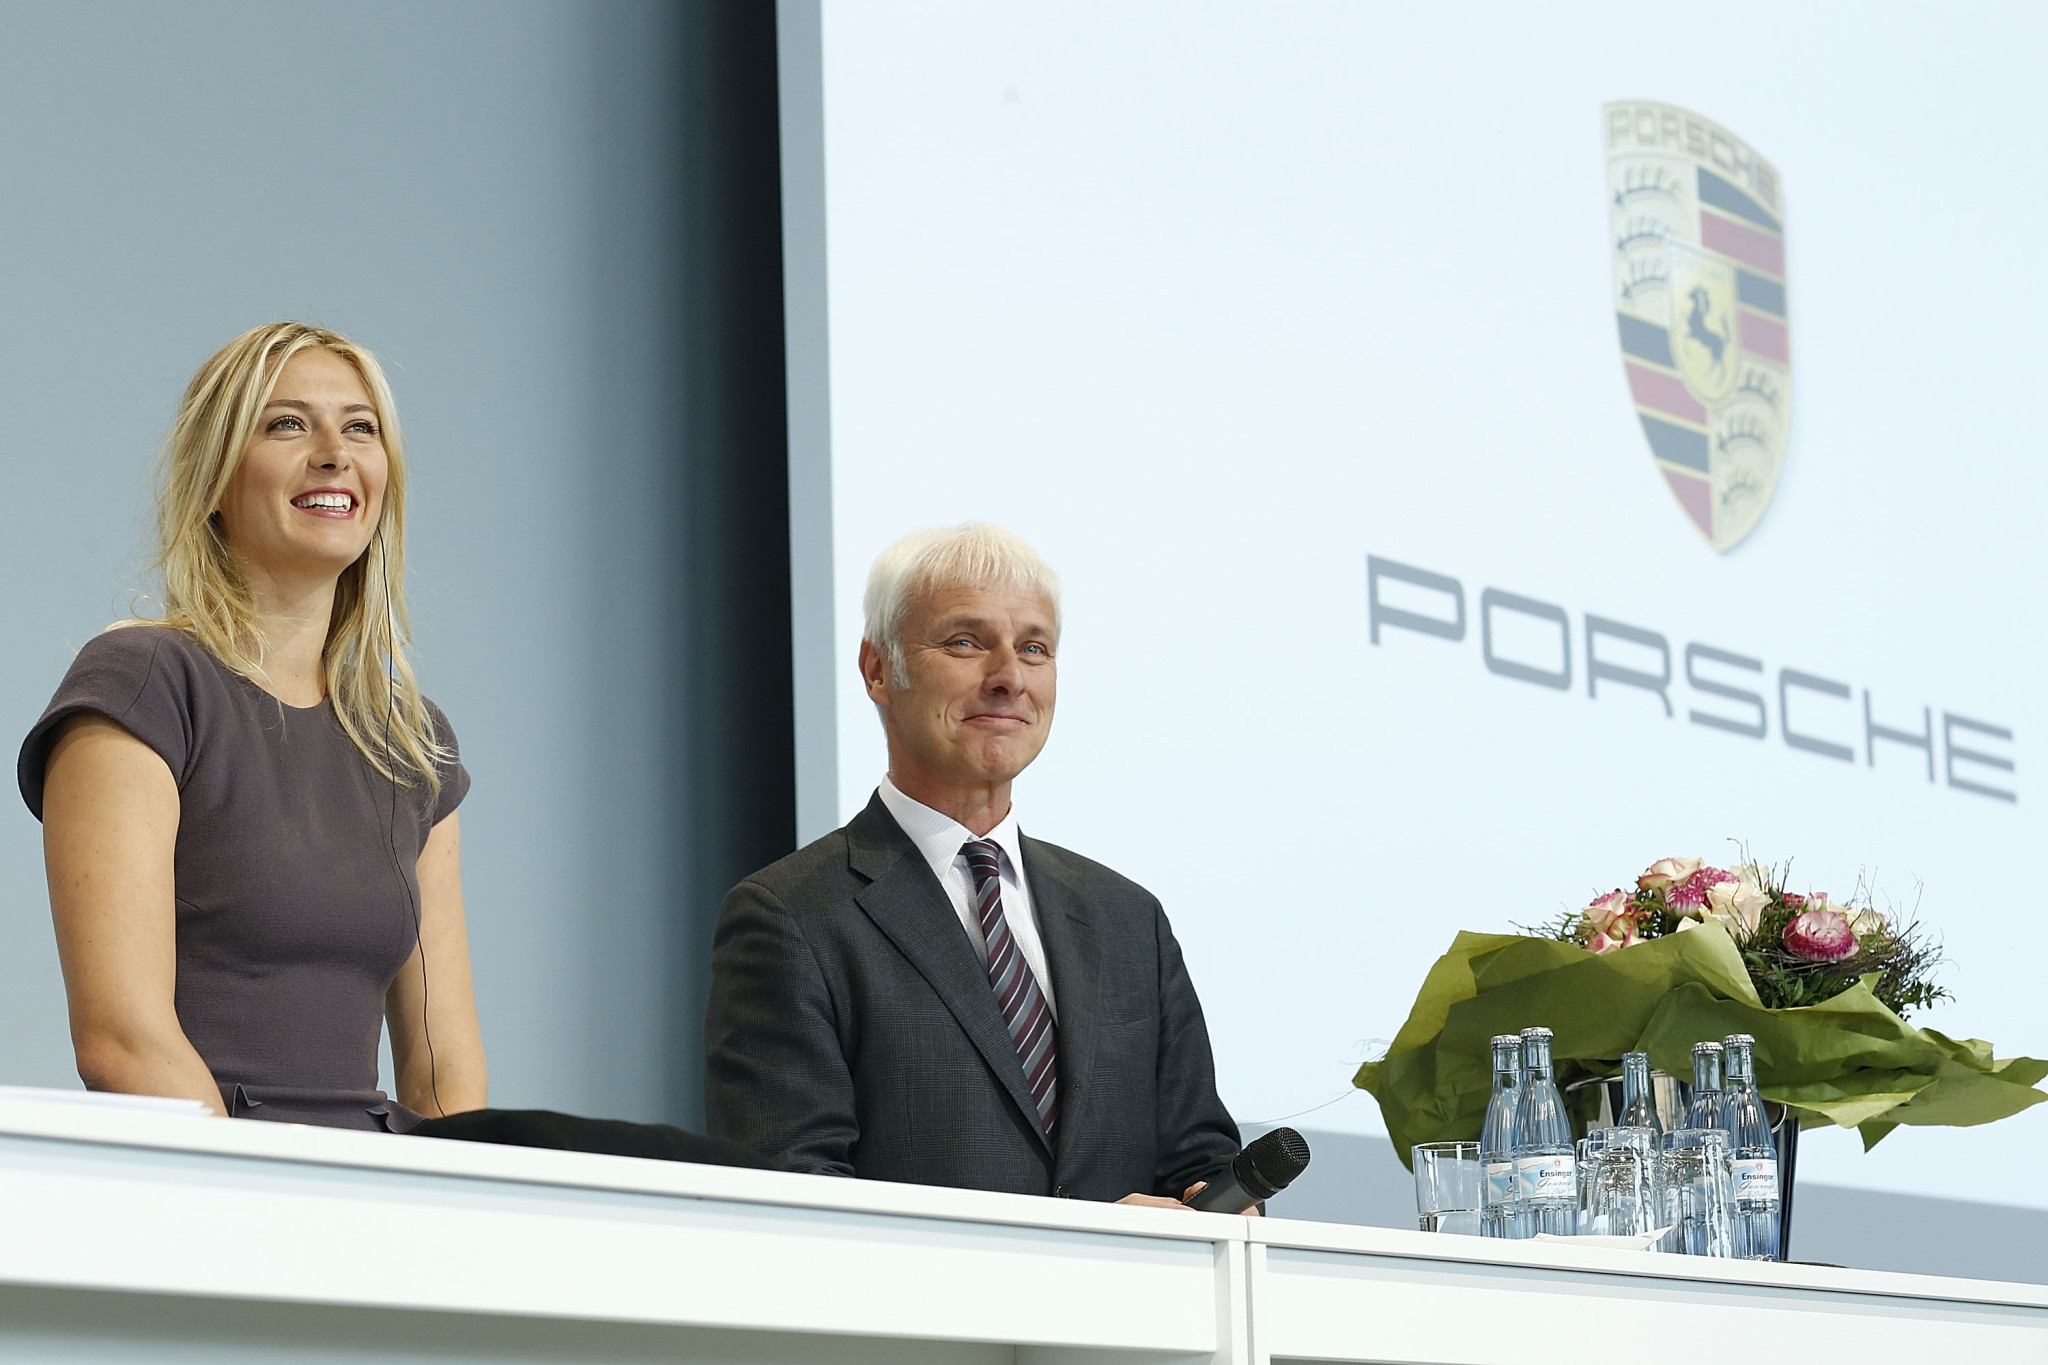 Maria Sharapova looks hot wearing a tight gray dress at the Porche event in Stut #75234368